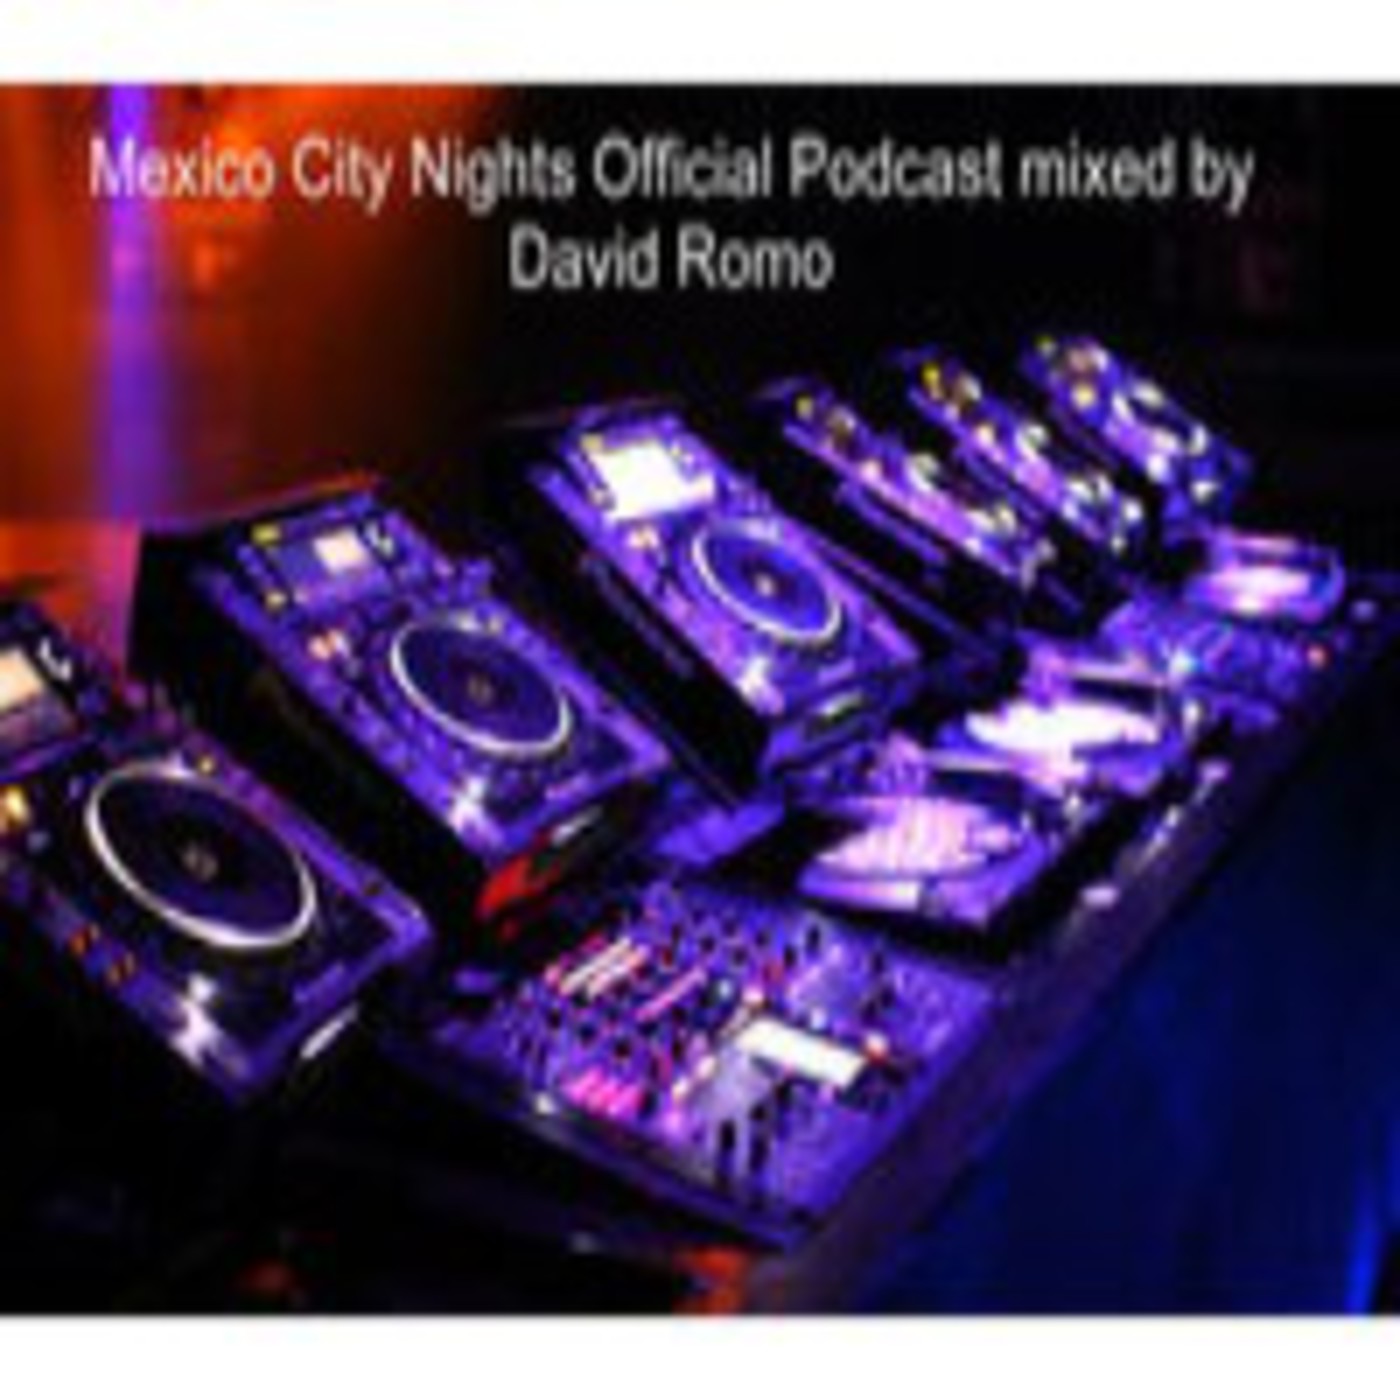 Mexico City Nights Official Podcast